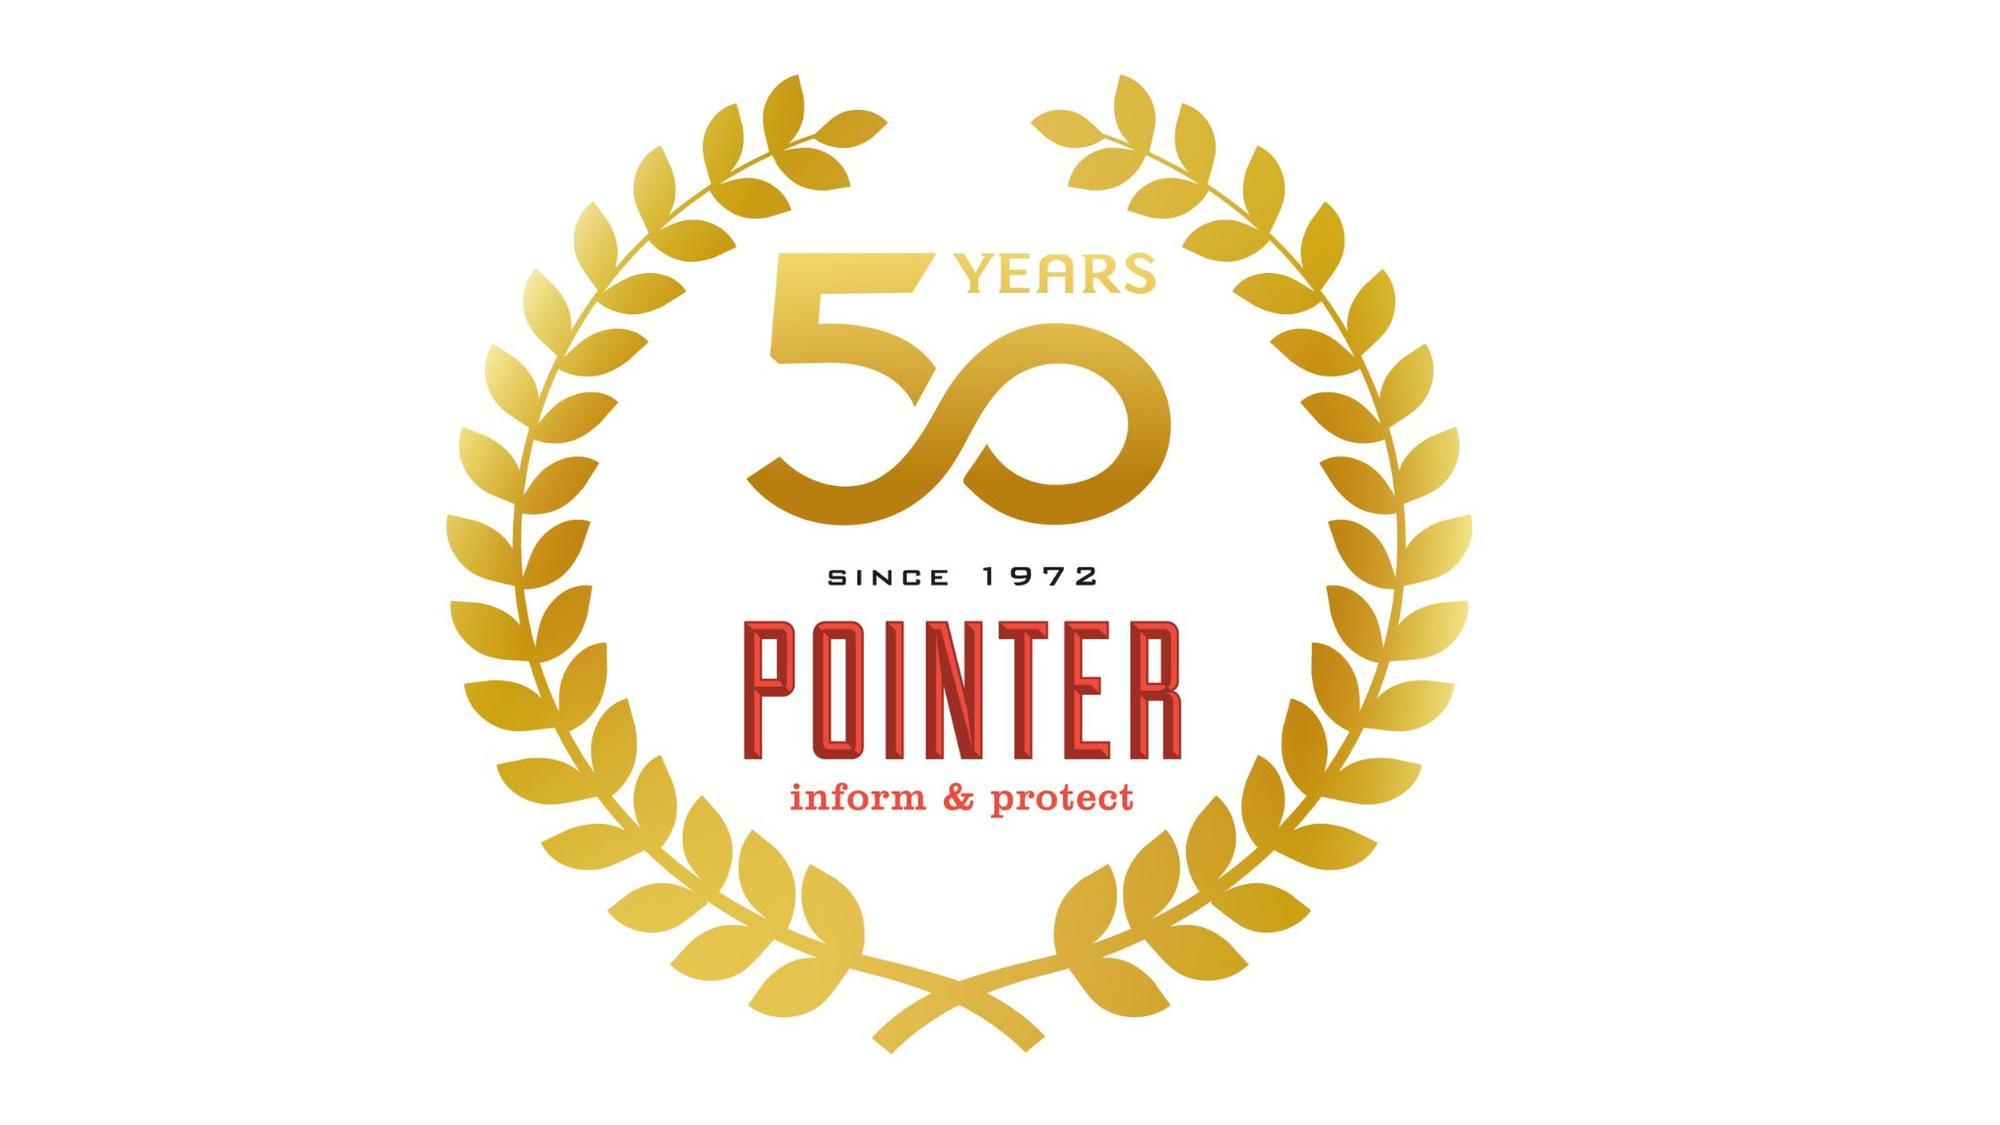 Pointer Fire and Security Services celebrates its 50th Anniversary